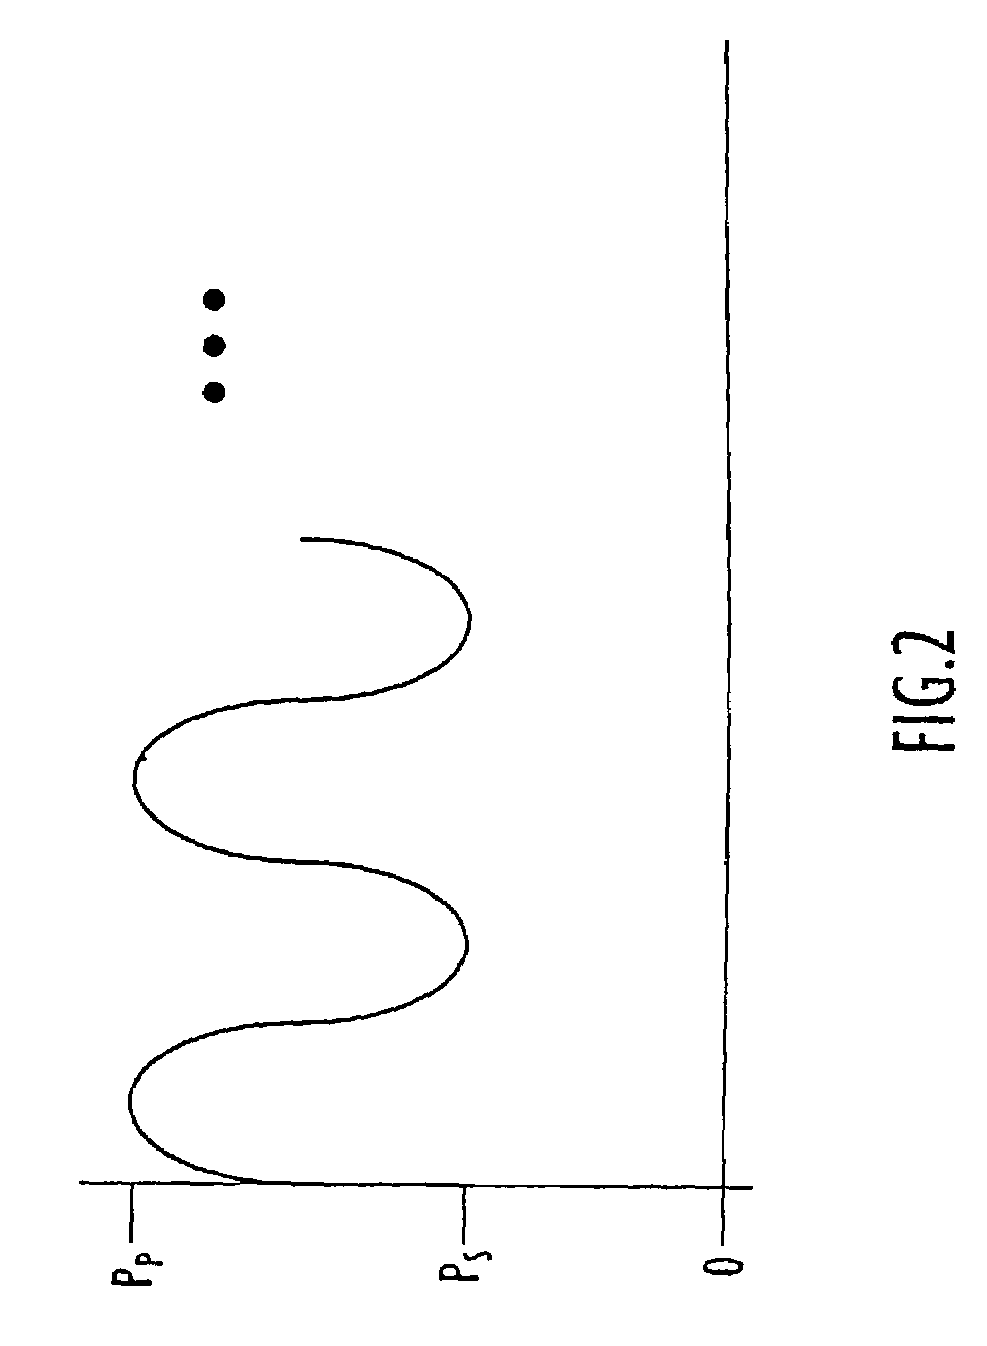 Apparatus and methods for directly displacing the partition between the middle ear and inner ear at an infrasonic frequency